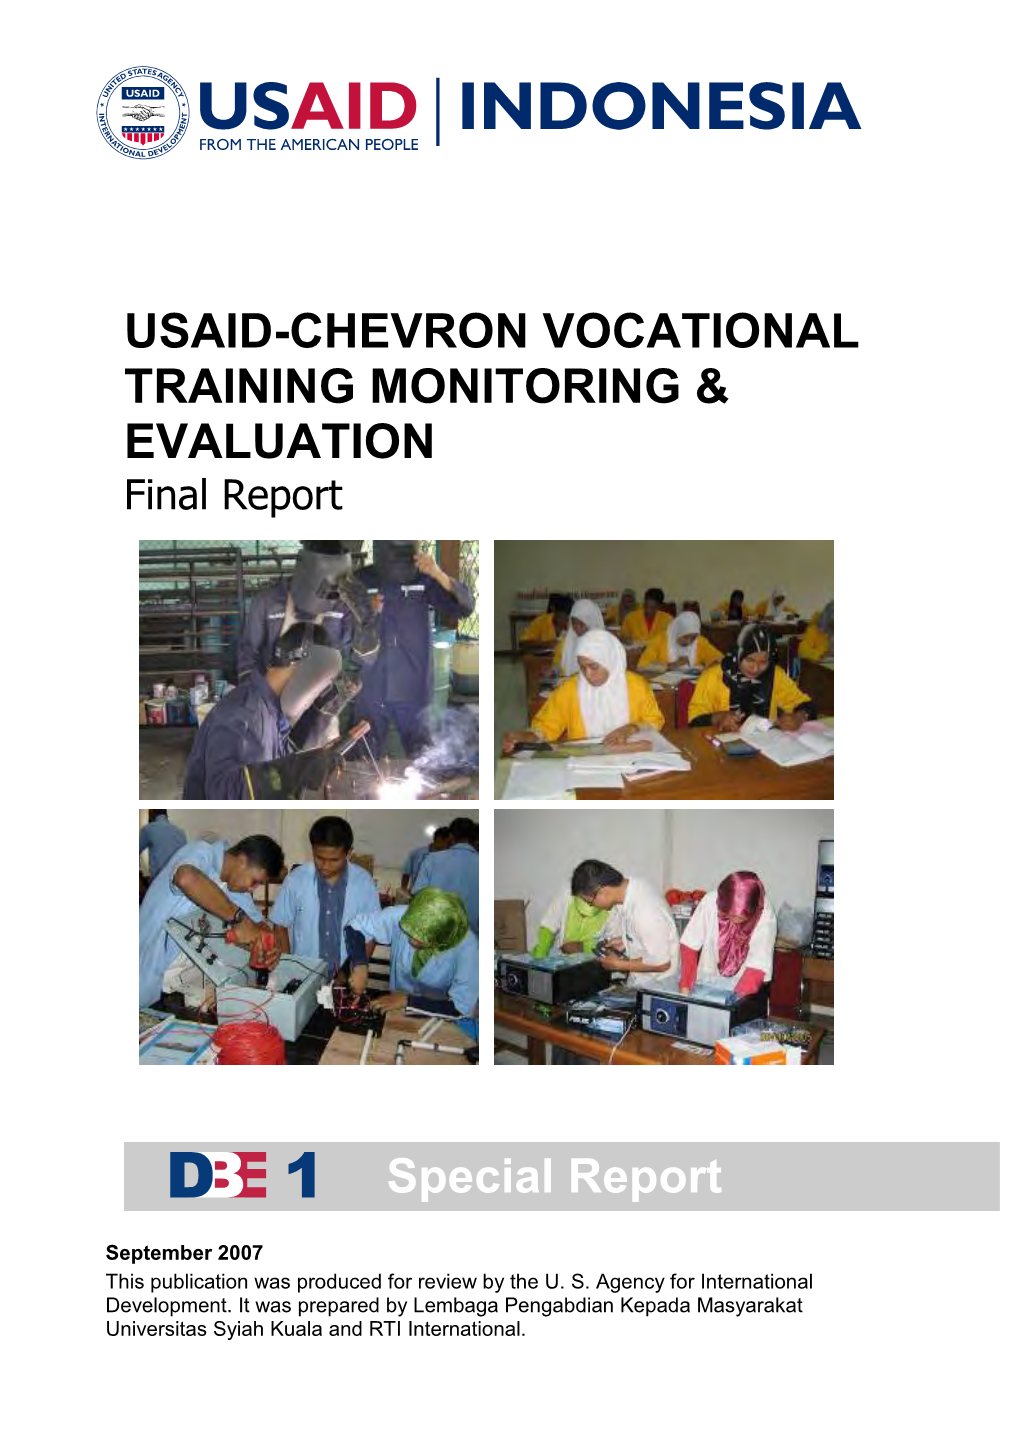 USAID-CHEVRON VOCATIONAL TRAINING MONITORING & EVALUATION Final Report